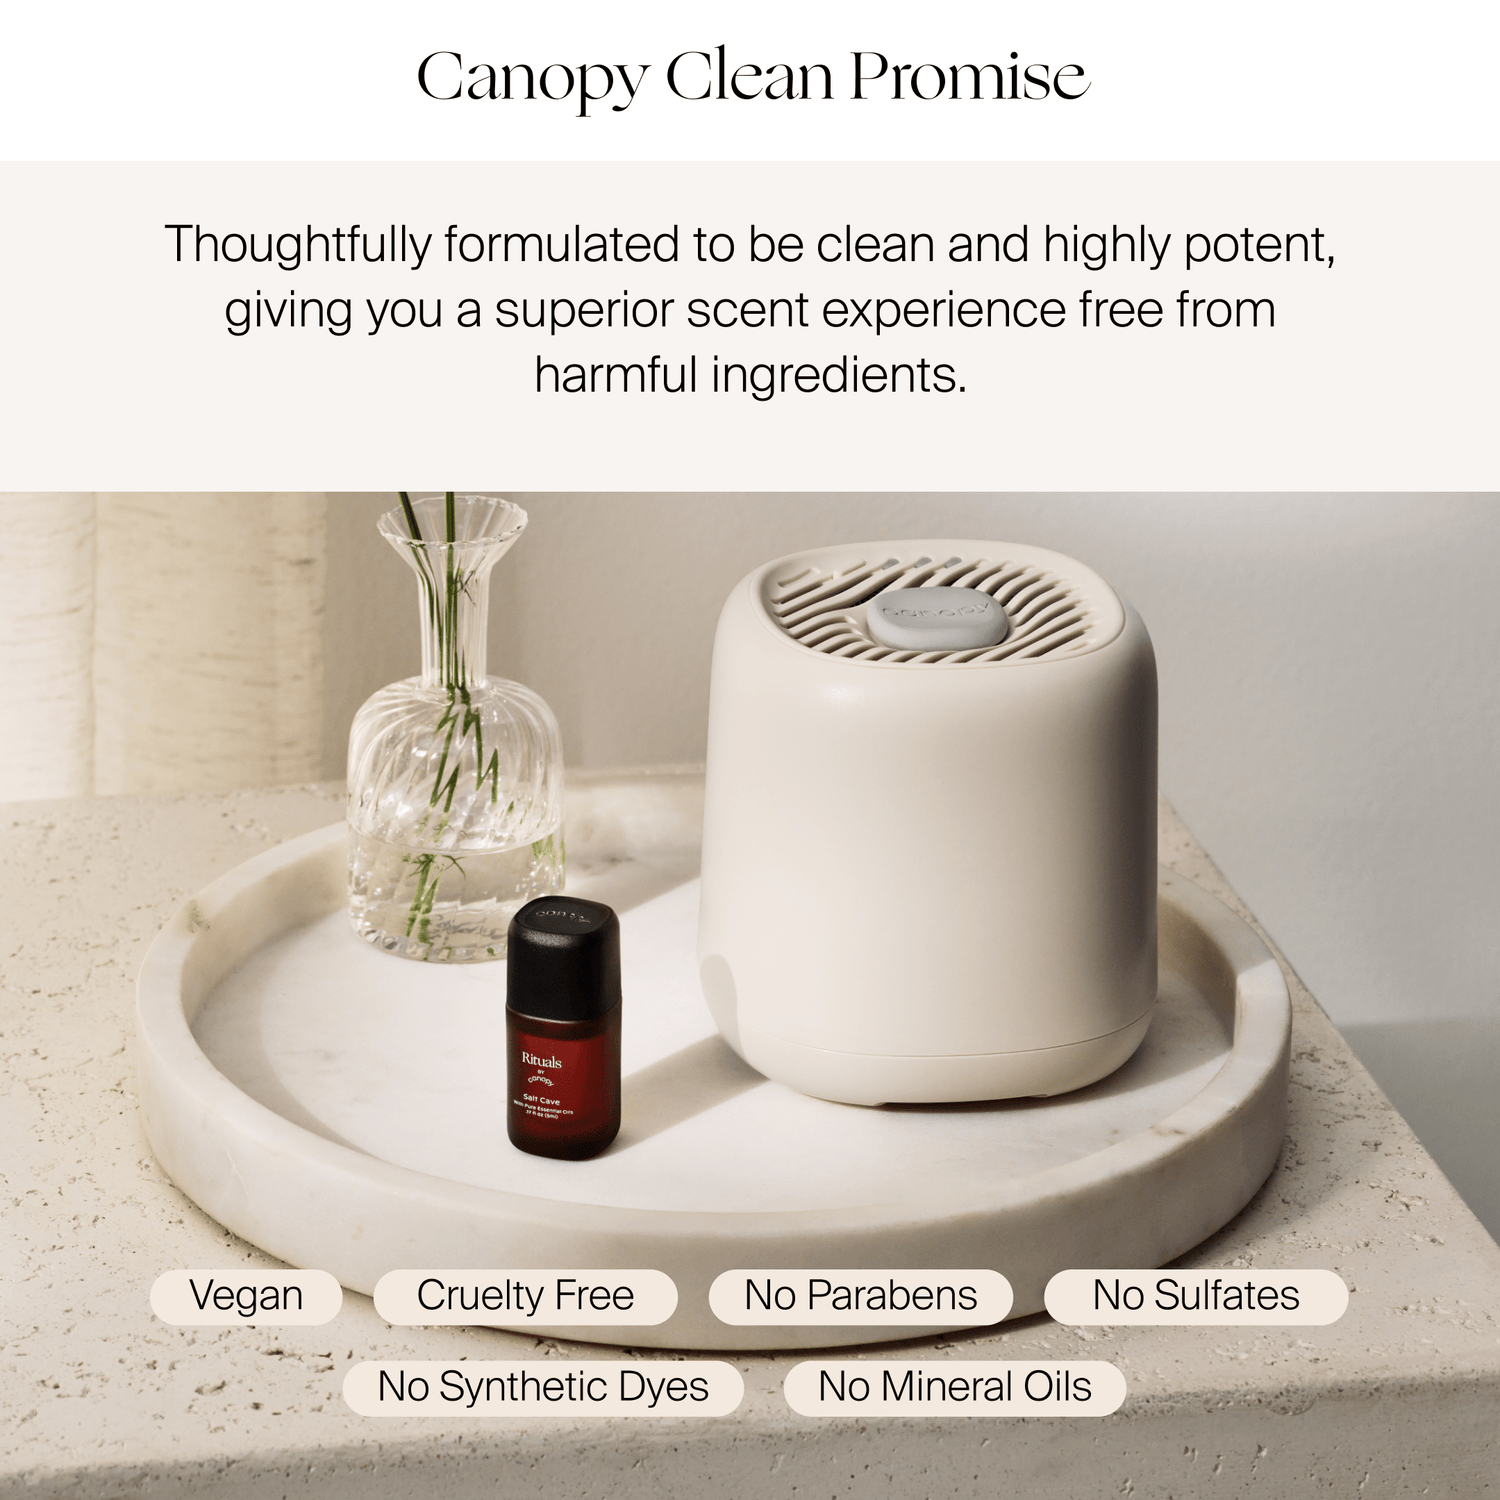 Canopy Diffuser White - for Scent Essential Oils and Aromatherapy